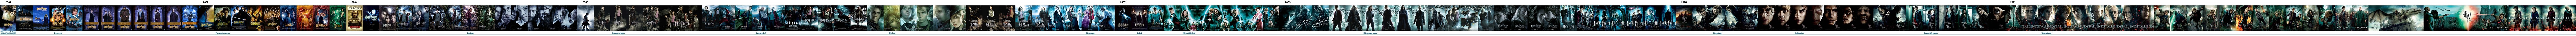 Harry Potter posters